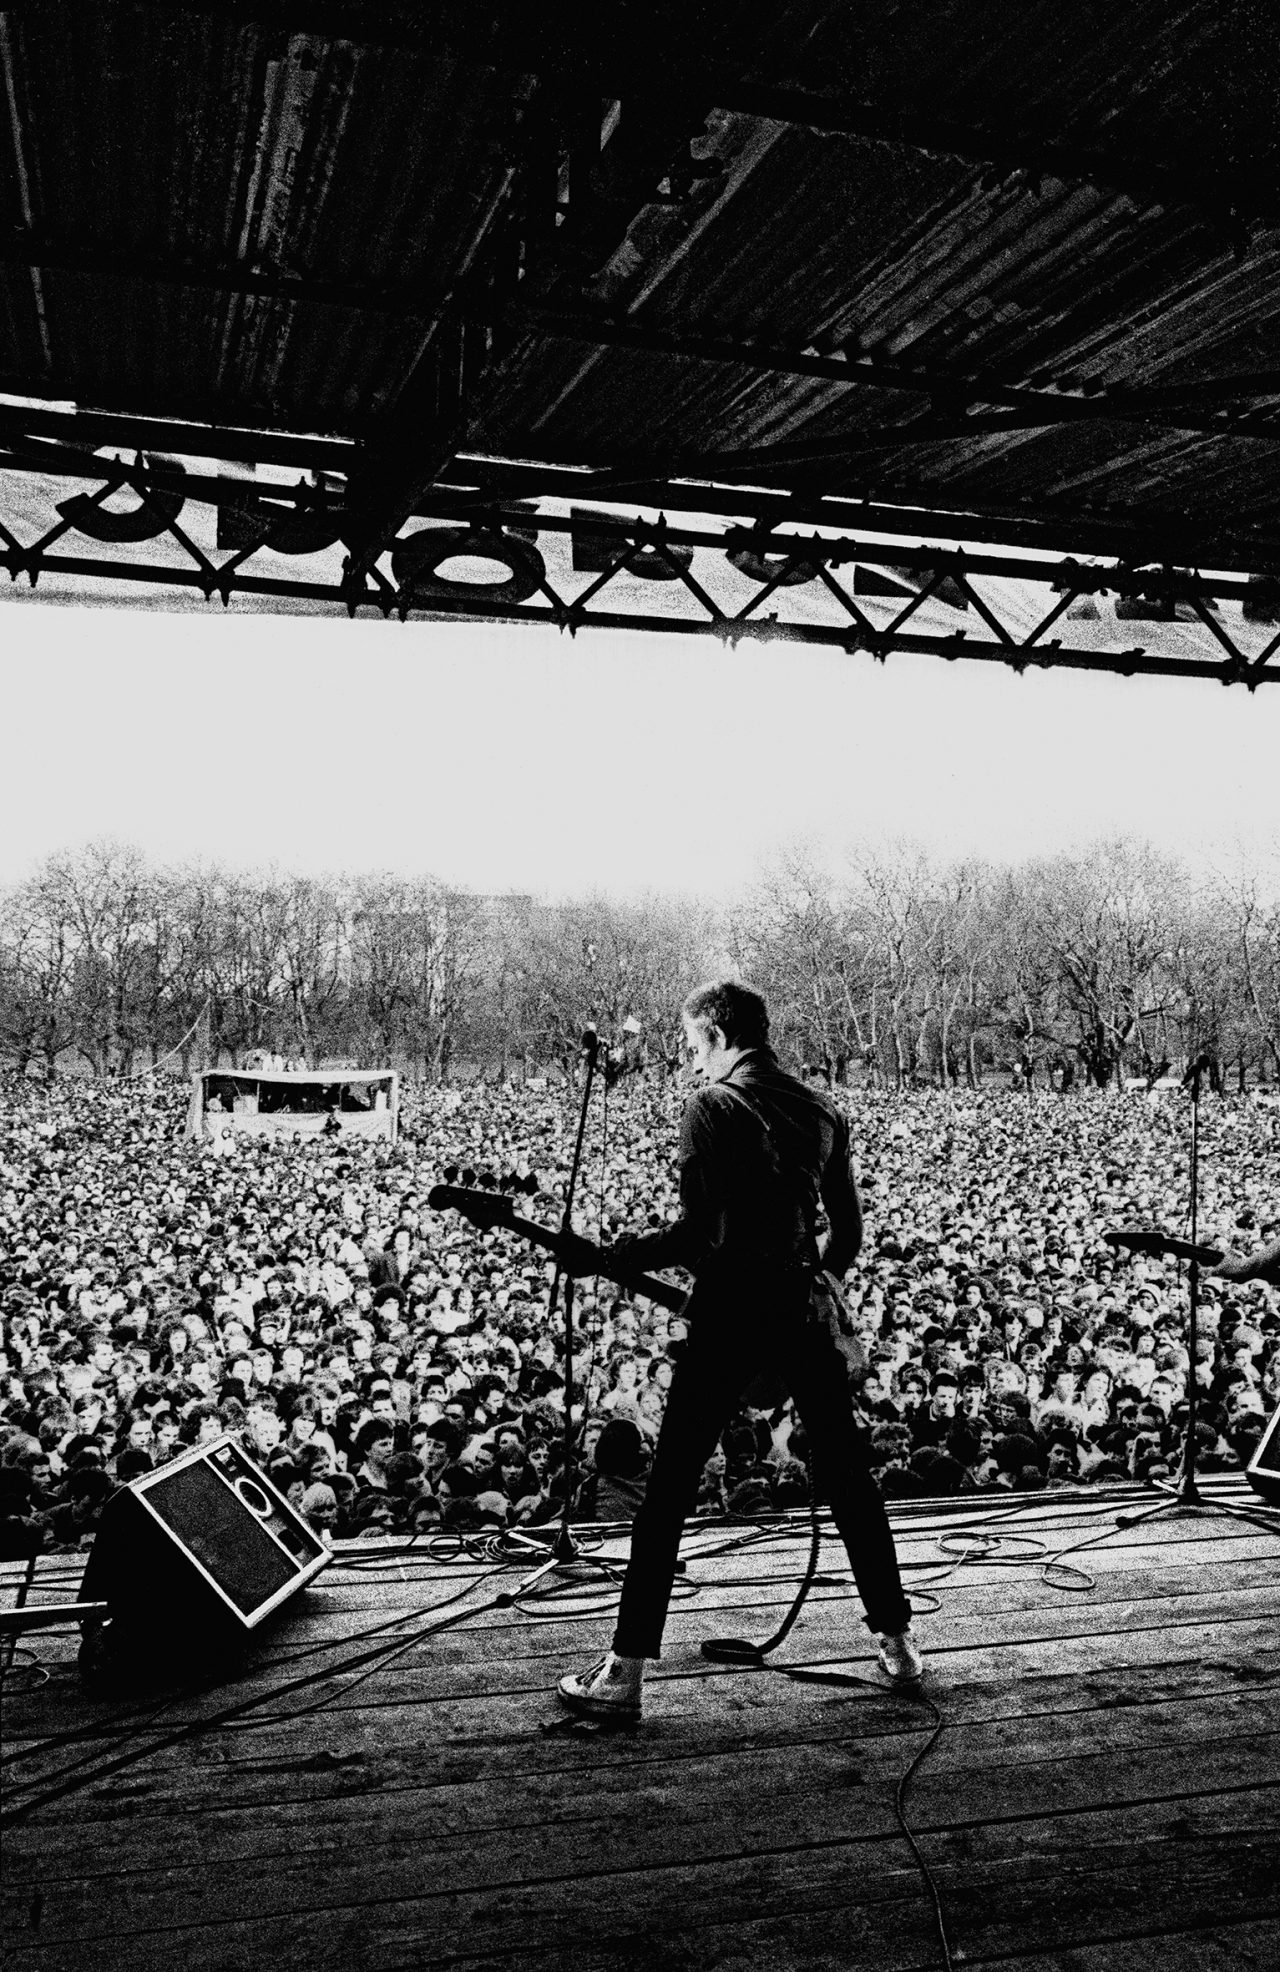 Paul Simonon of the Clash performs at the Rock Against Racism concert at Victoria Park, London in April, 1978 Photograph: © Syd Shelton